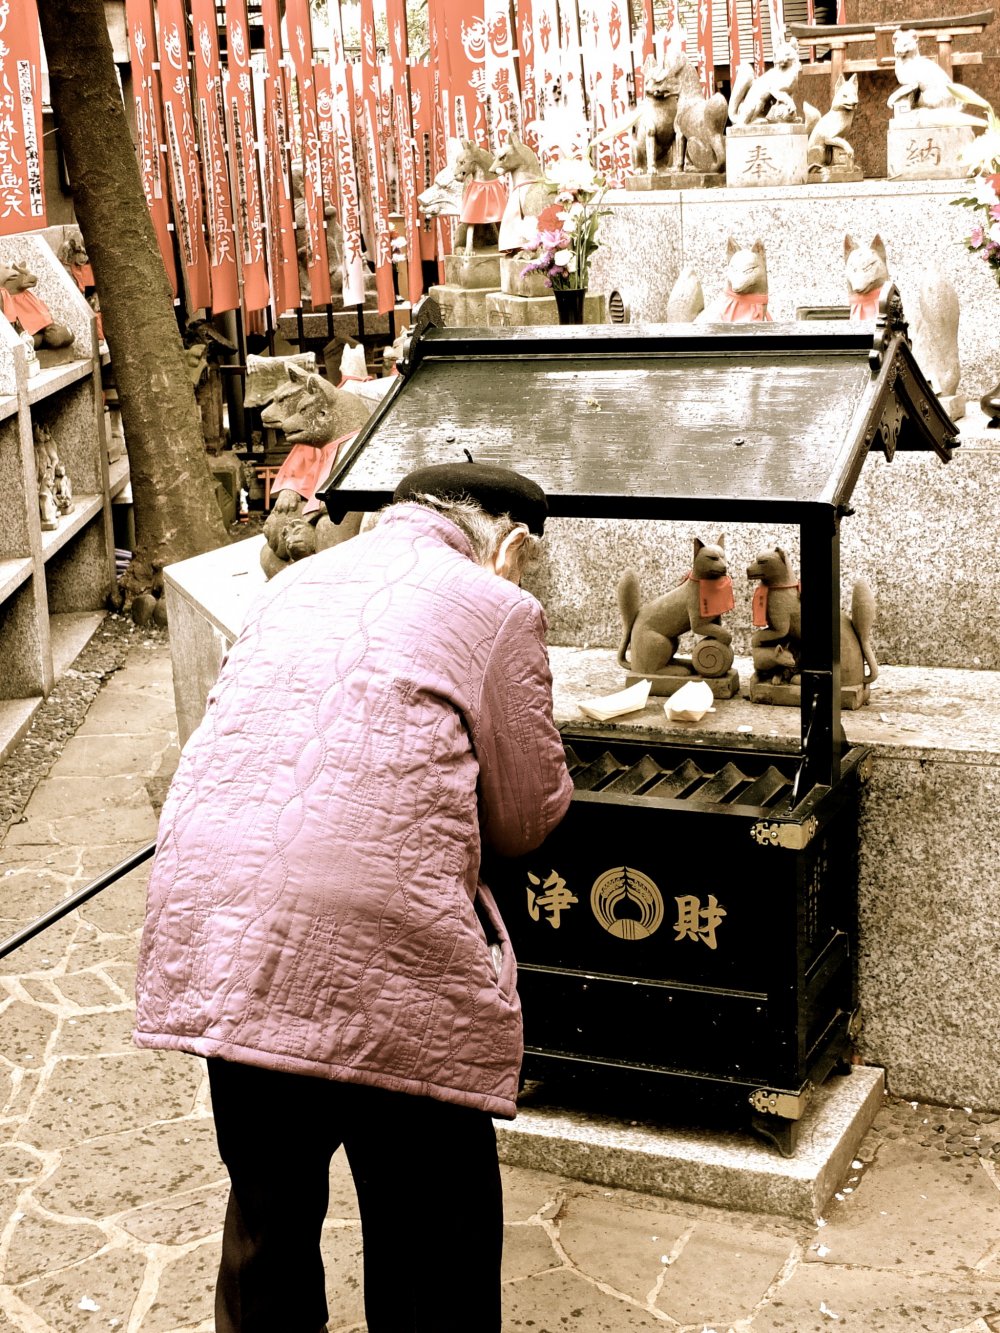 This elderly woman had a plastic bag full of small coins; she went from prayer station to prayer station, made an offering and prayed, then went to the next one